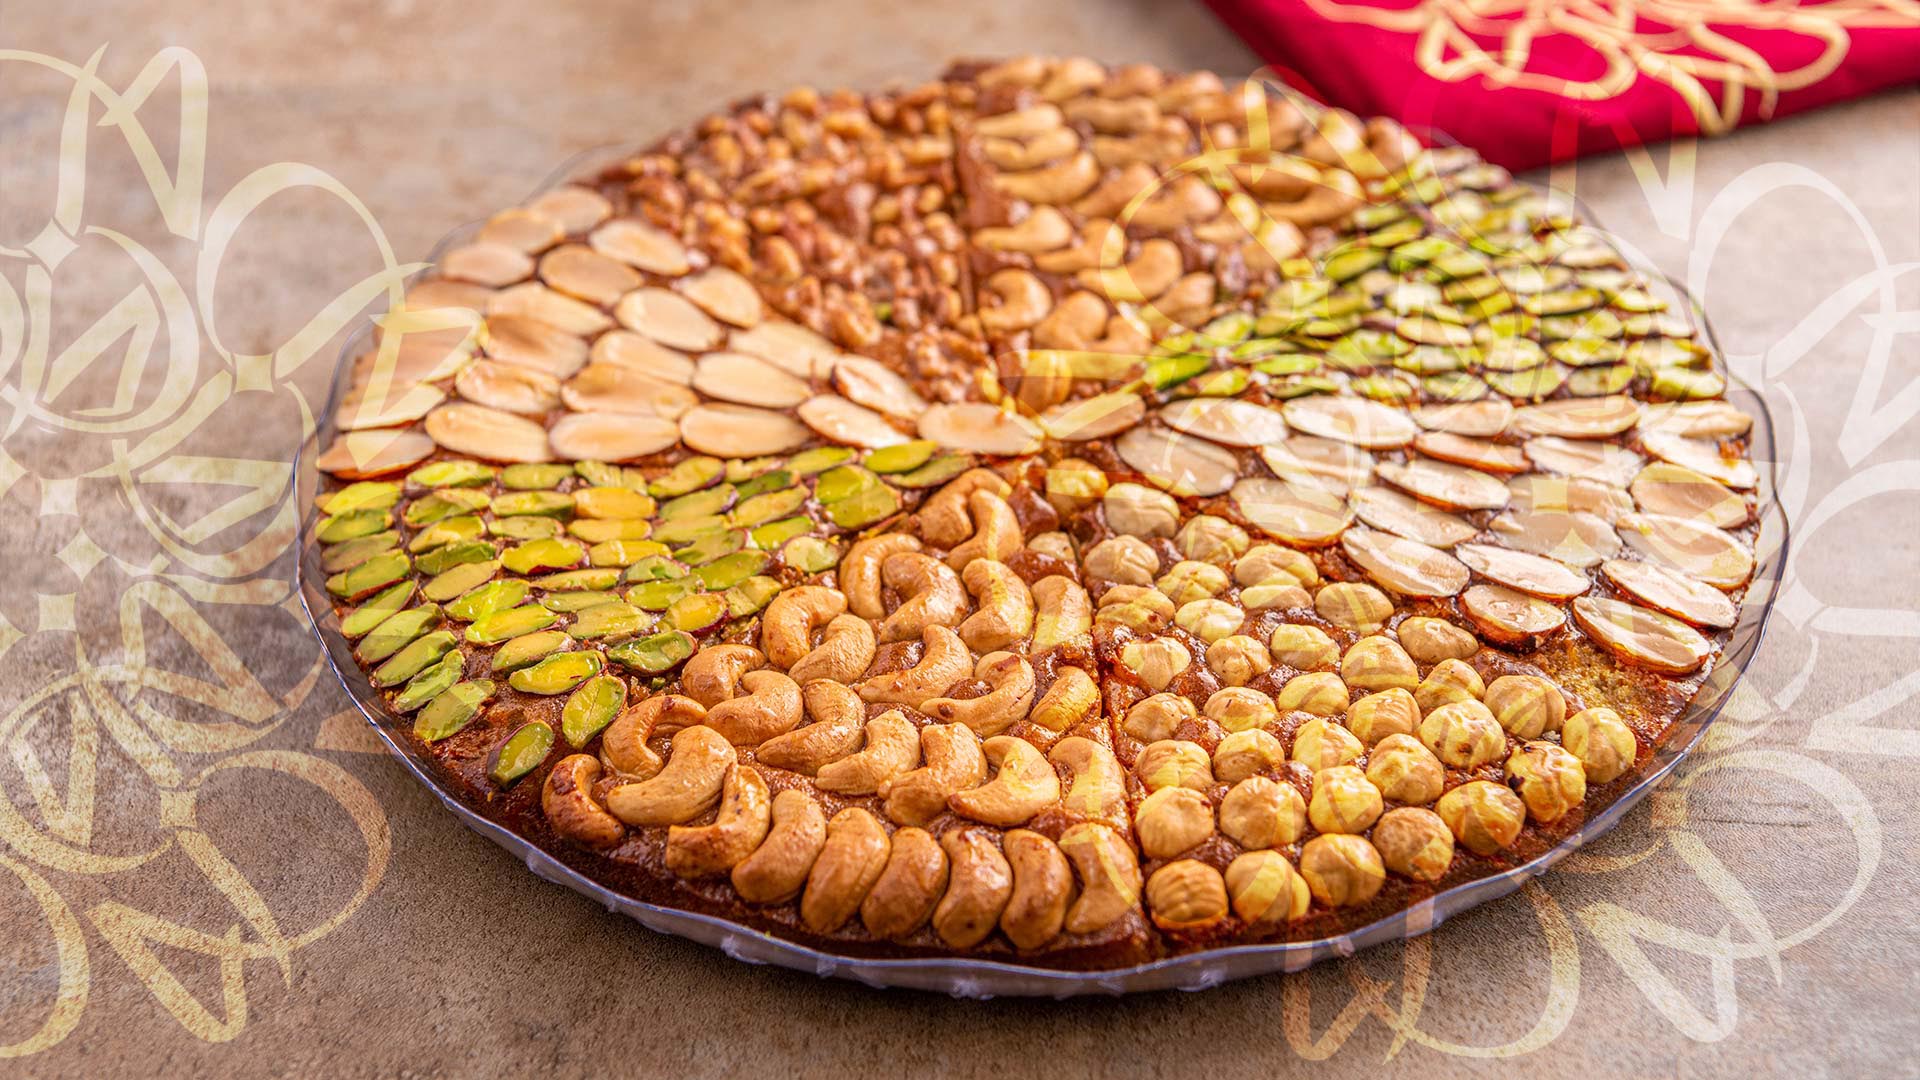 Savor the Authentic Taste of Arabic Heritage with Our Specialty Sweets